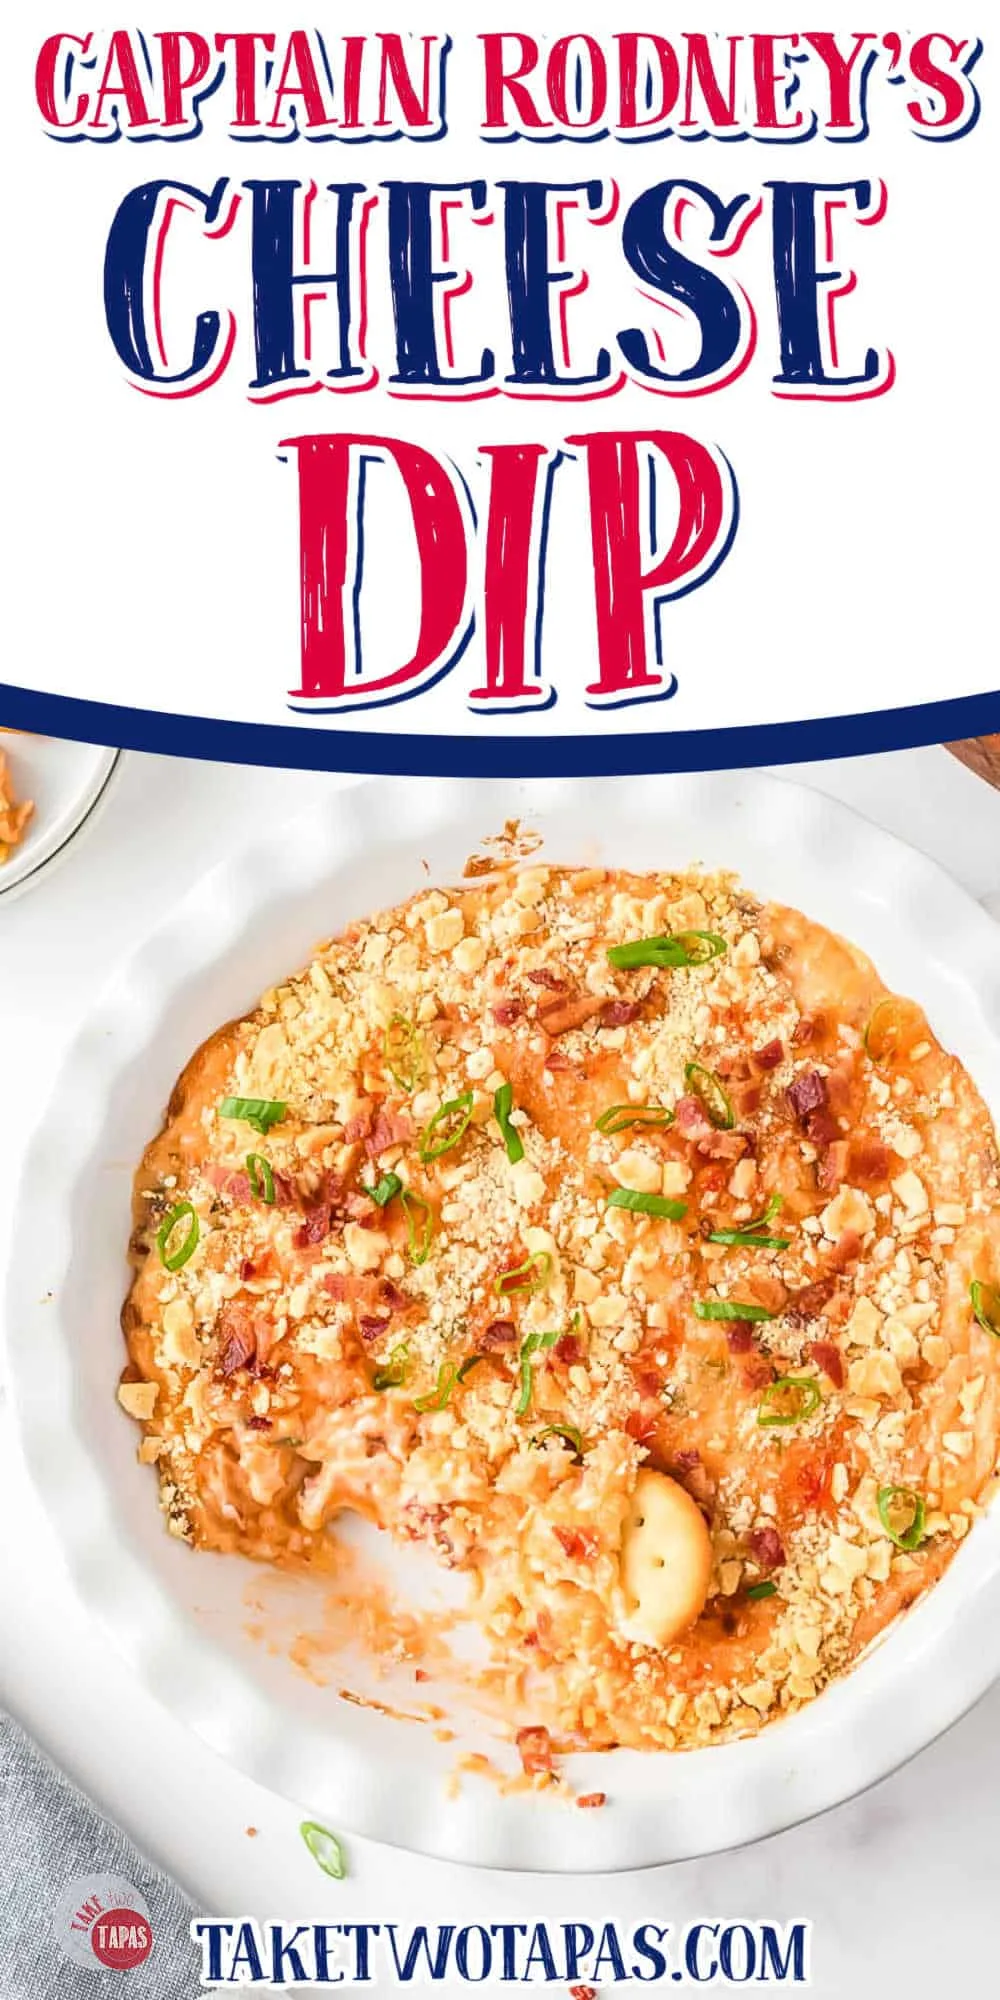 dip with text "super easy captain rodney's cheese bake"